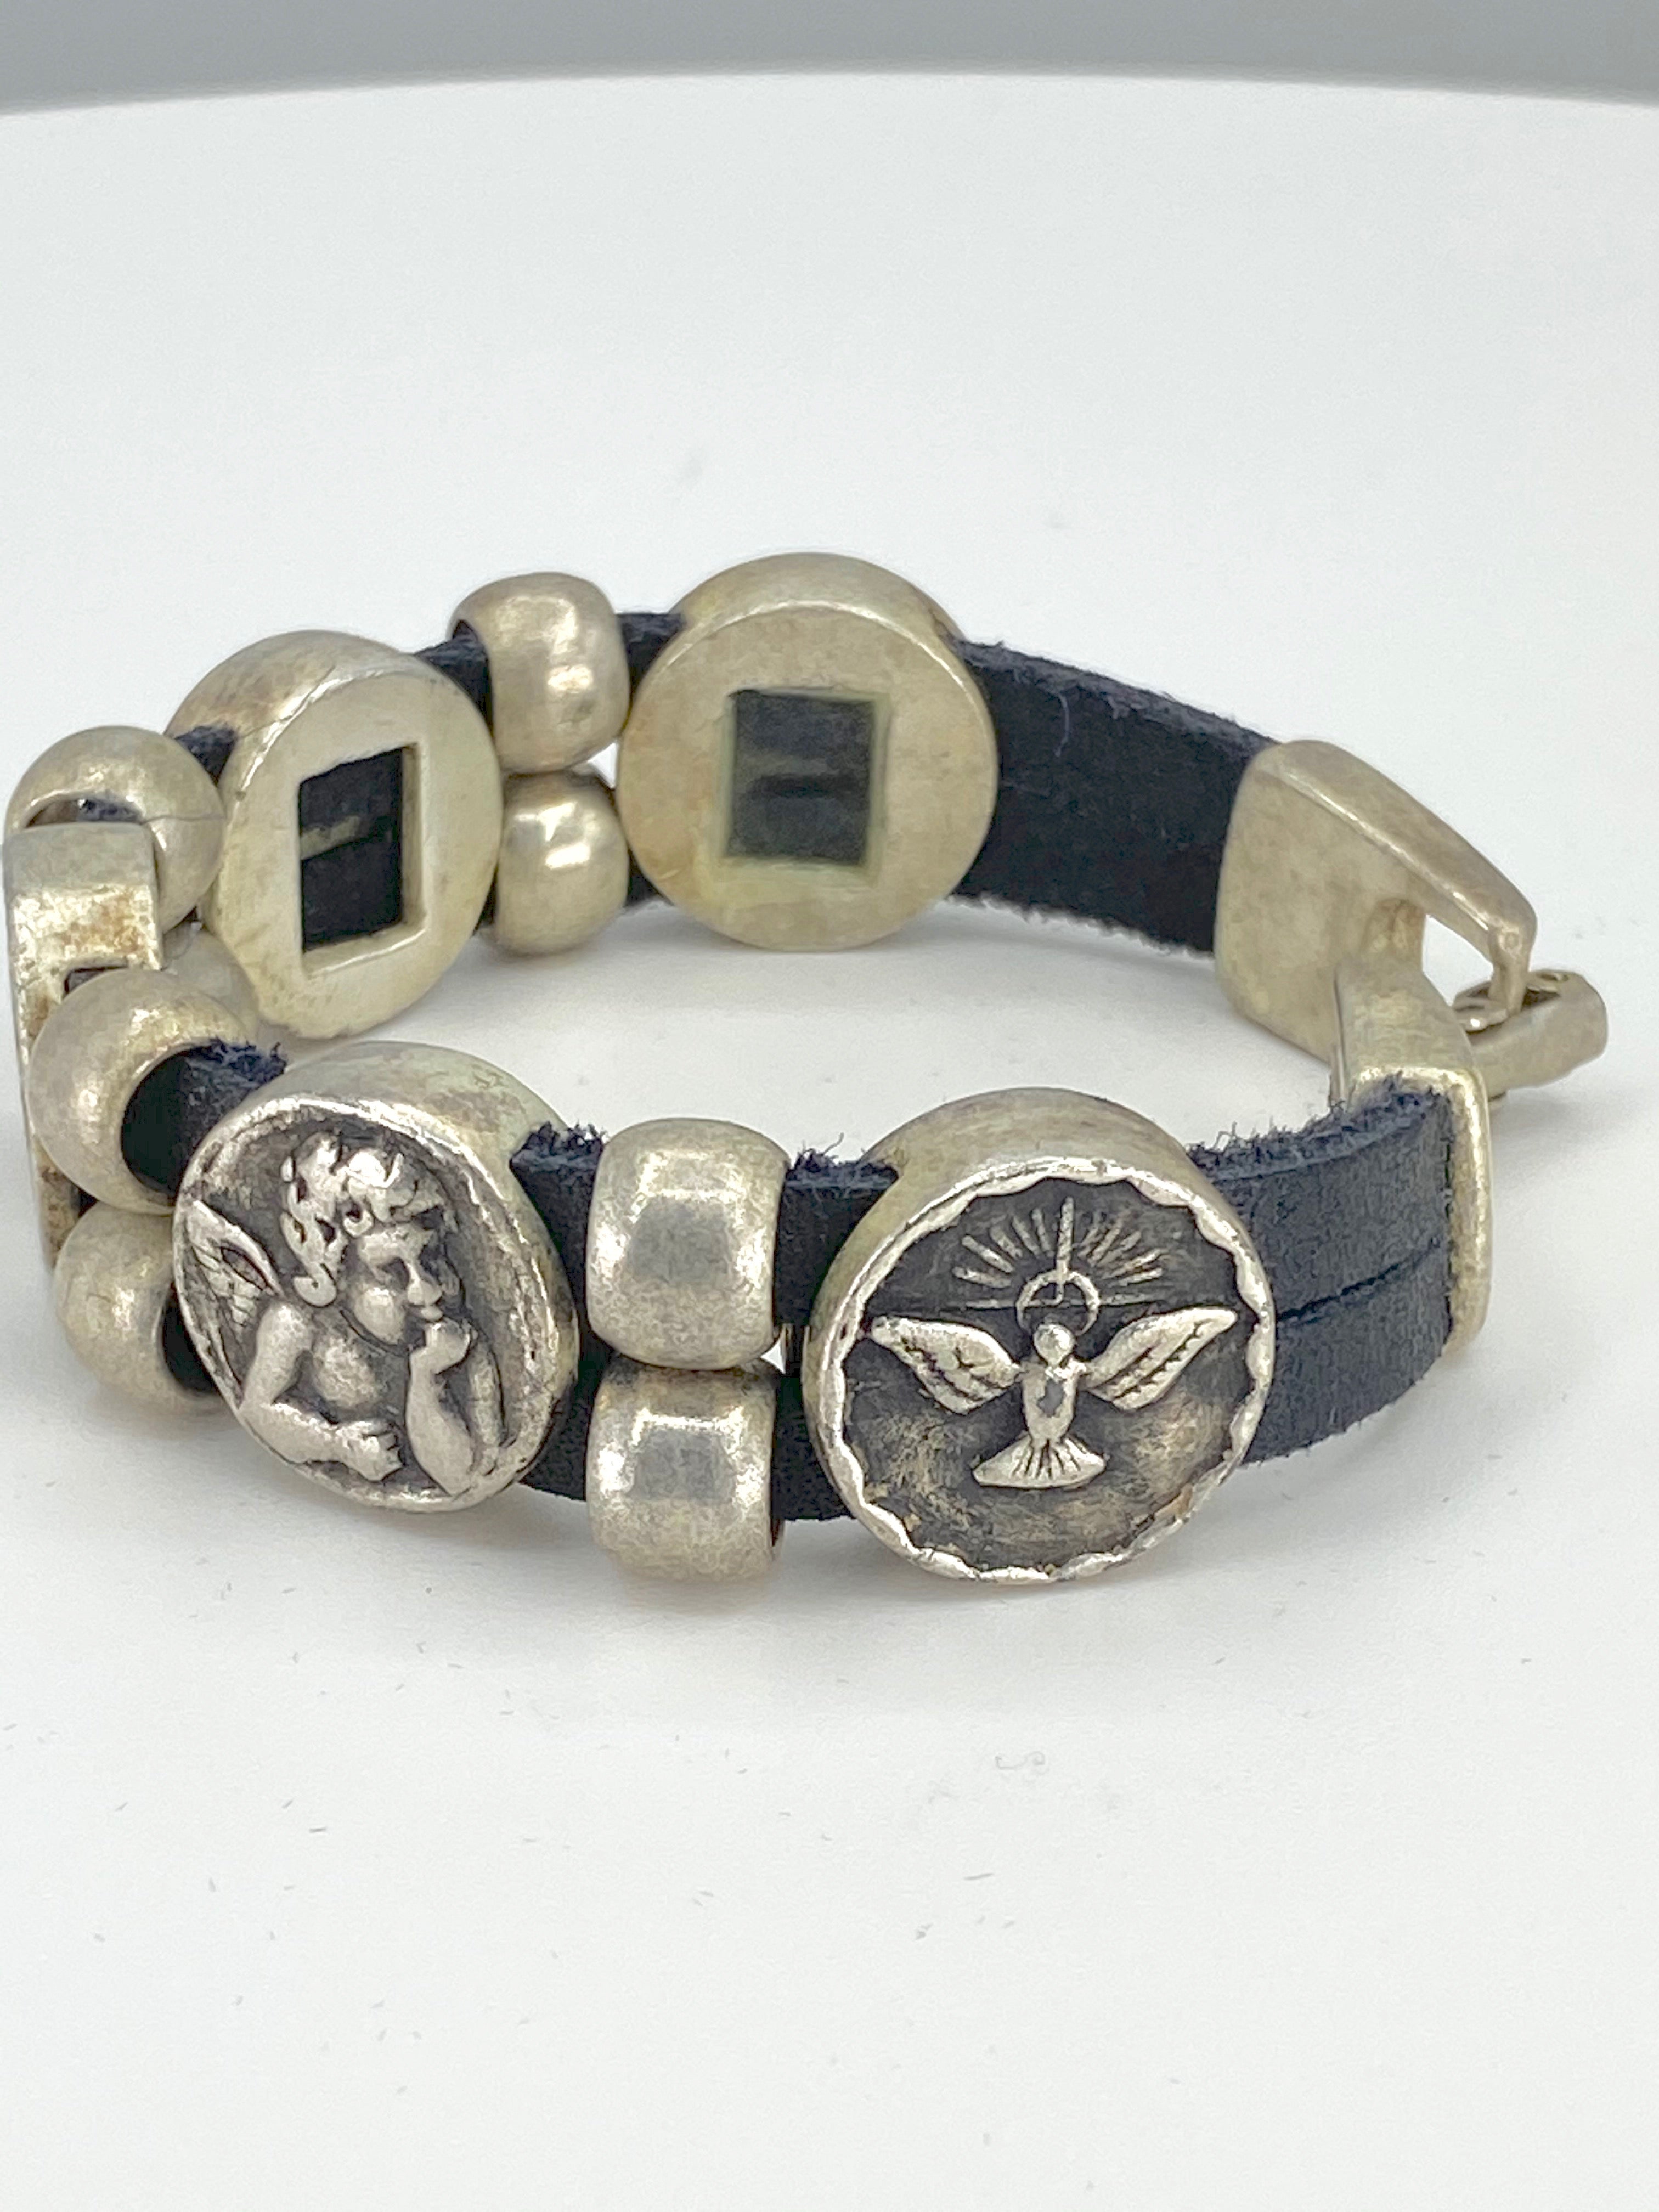 Vintage Bracelet with Double Leather Strap and Medals of The Virgen Mary, St. Benedict, Sacred Heart of Jesus, Guardian Angel, and Holy Spirit  handmade jewelry by Graciela's Collection